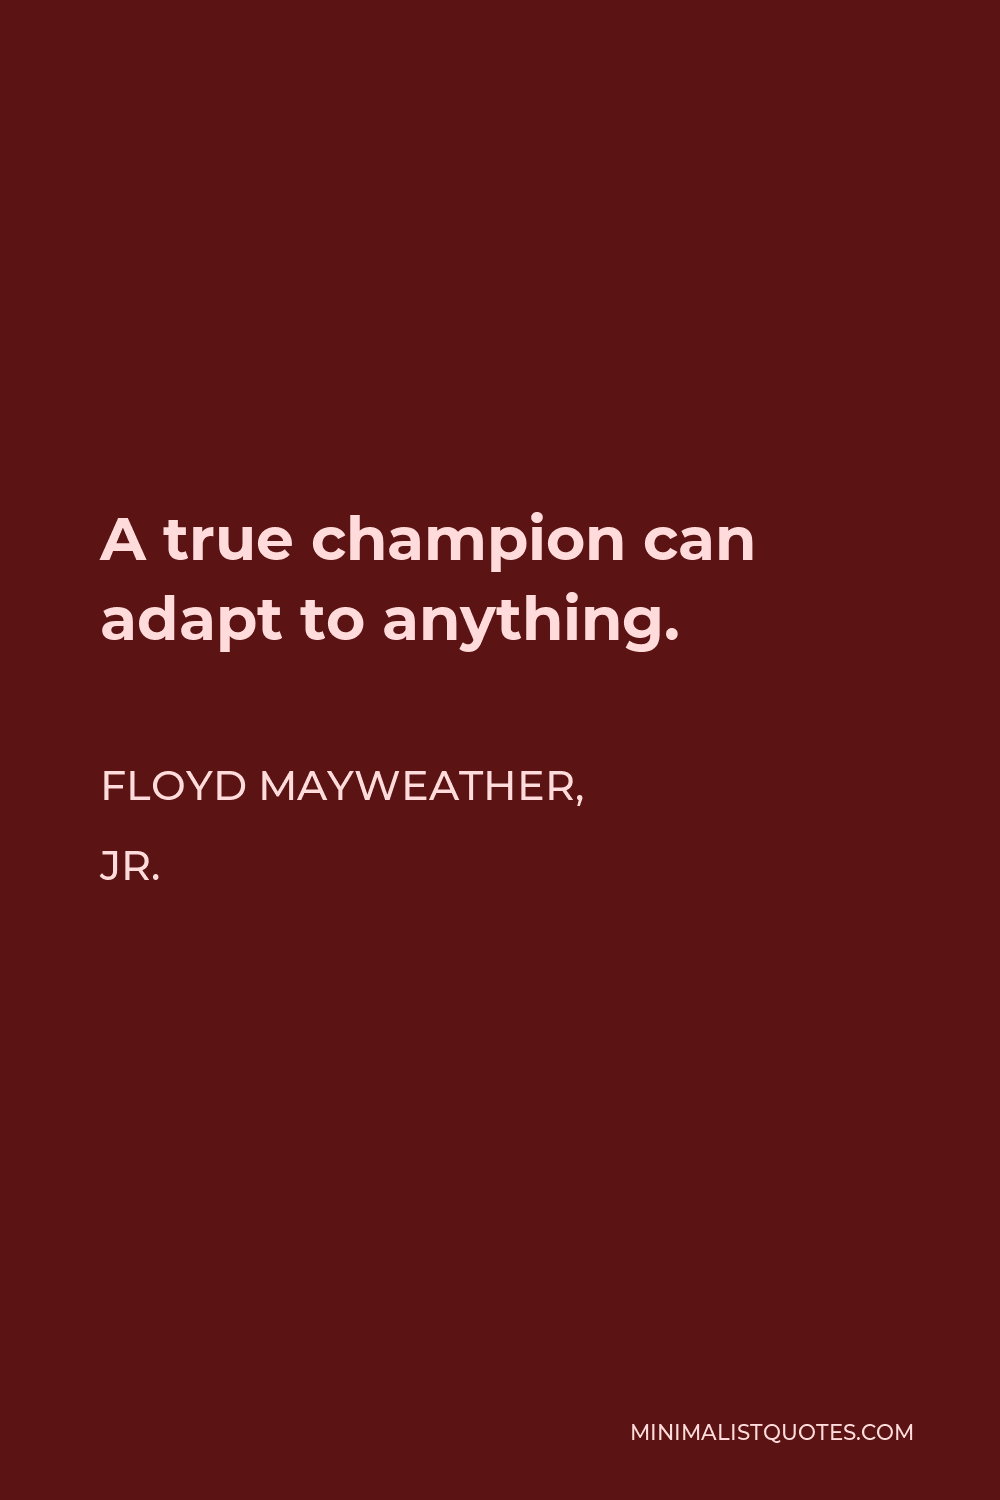 Floyd Mayweather, Jr. Quote - A true champion can adapt to anything.